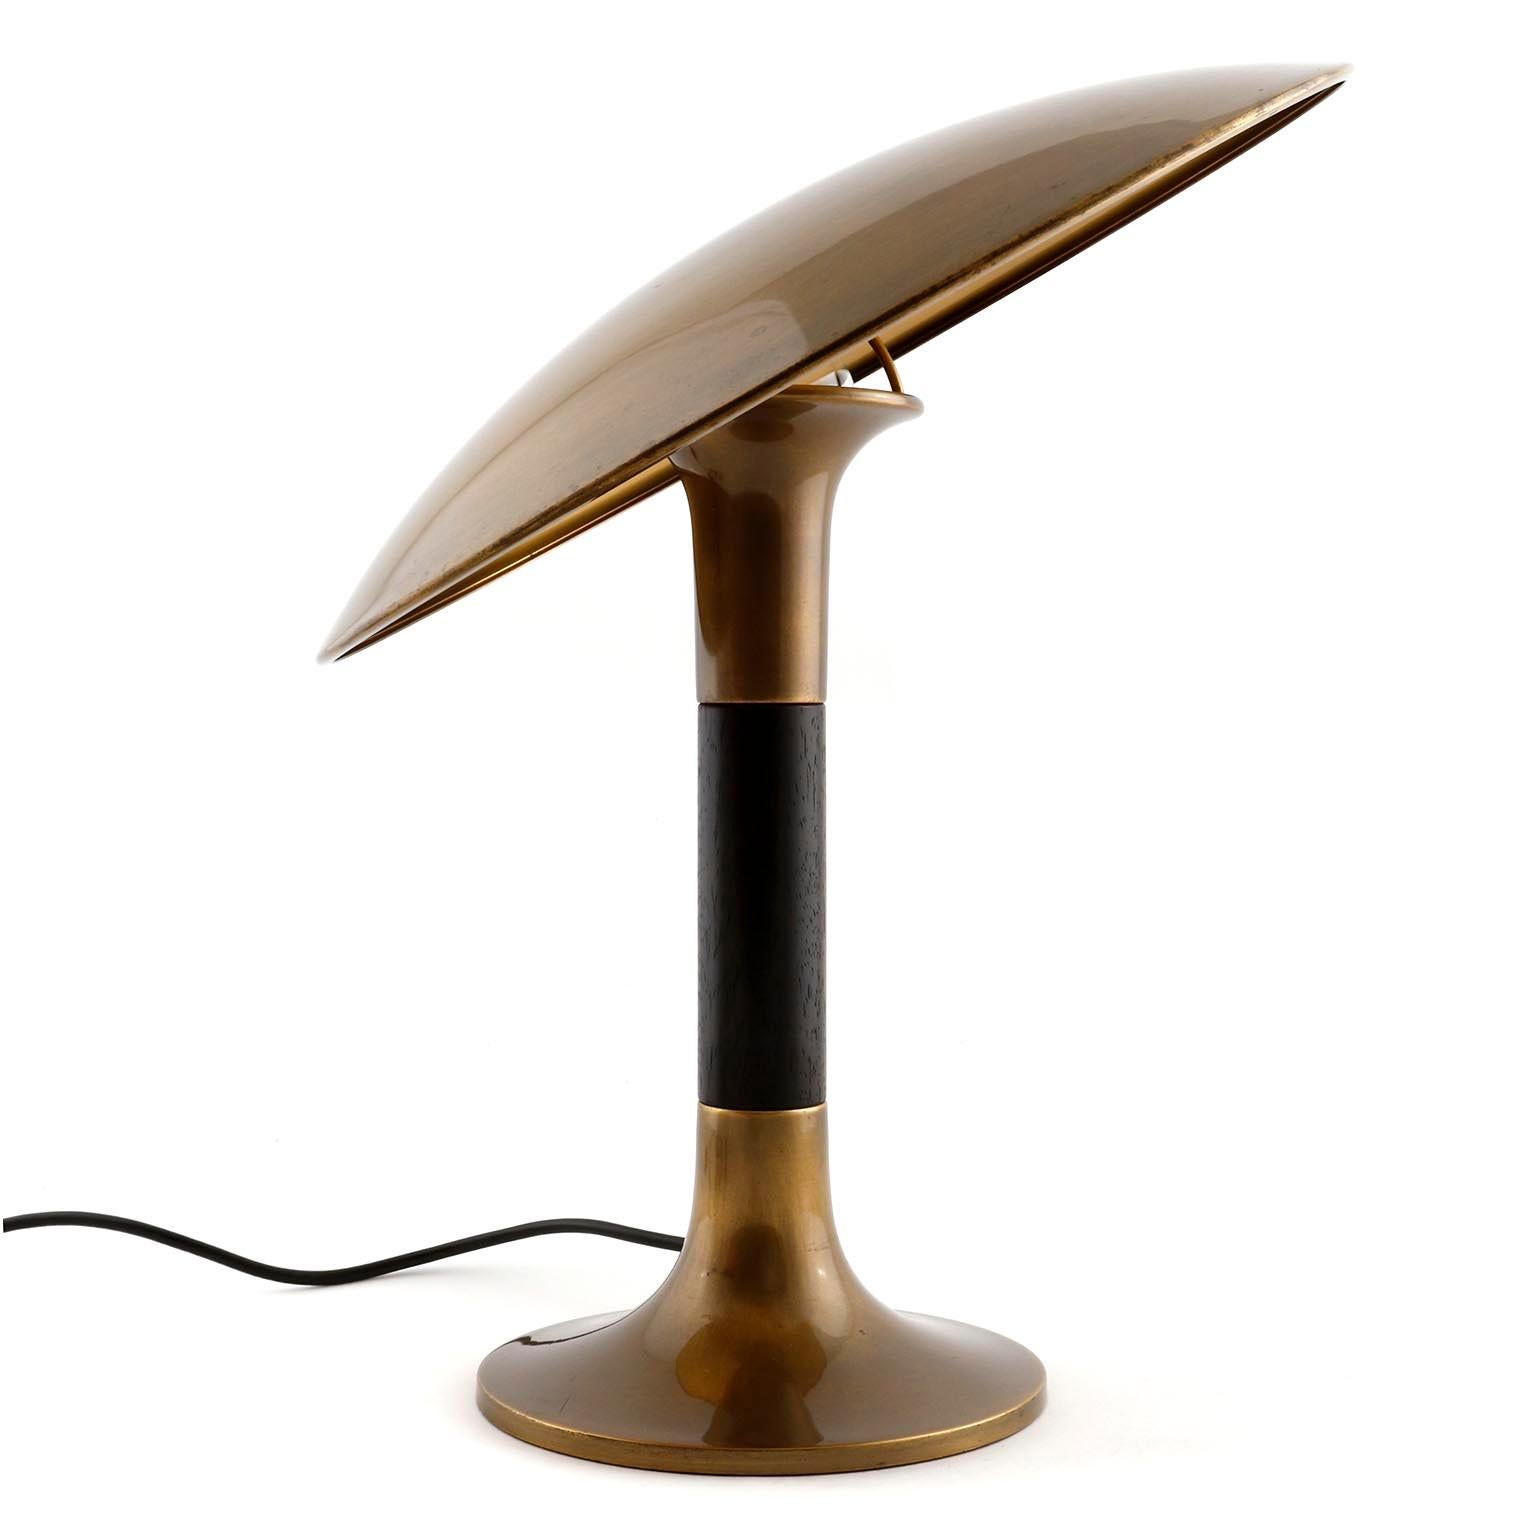 A rare table light fixture by Florian Schulz, Germany, manufactured in midcentury, circa 1970 (late 1960s or early 1970s).
This gorgeous lamp is made of solid brass with great patina. The swiveling and rotatable dome shaped lamp shade can be